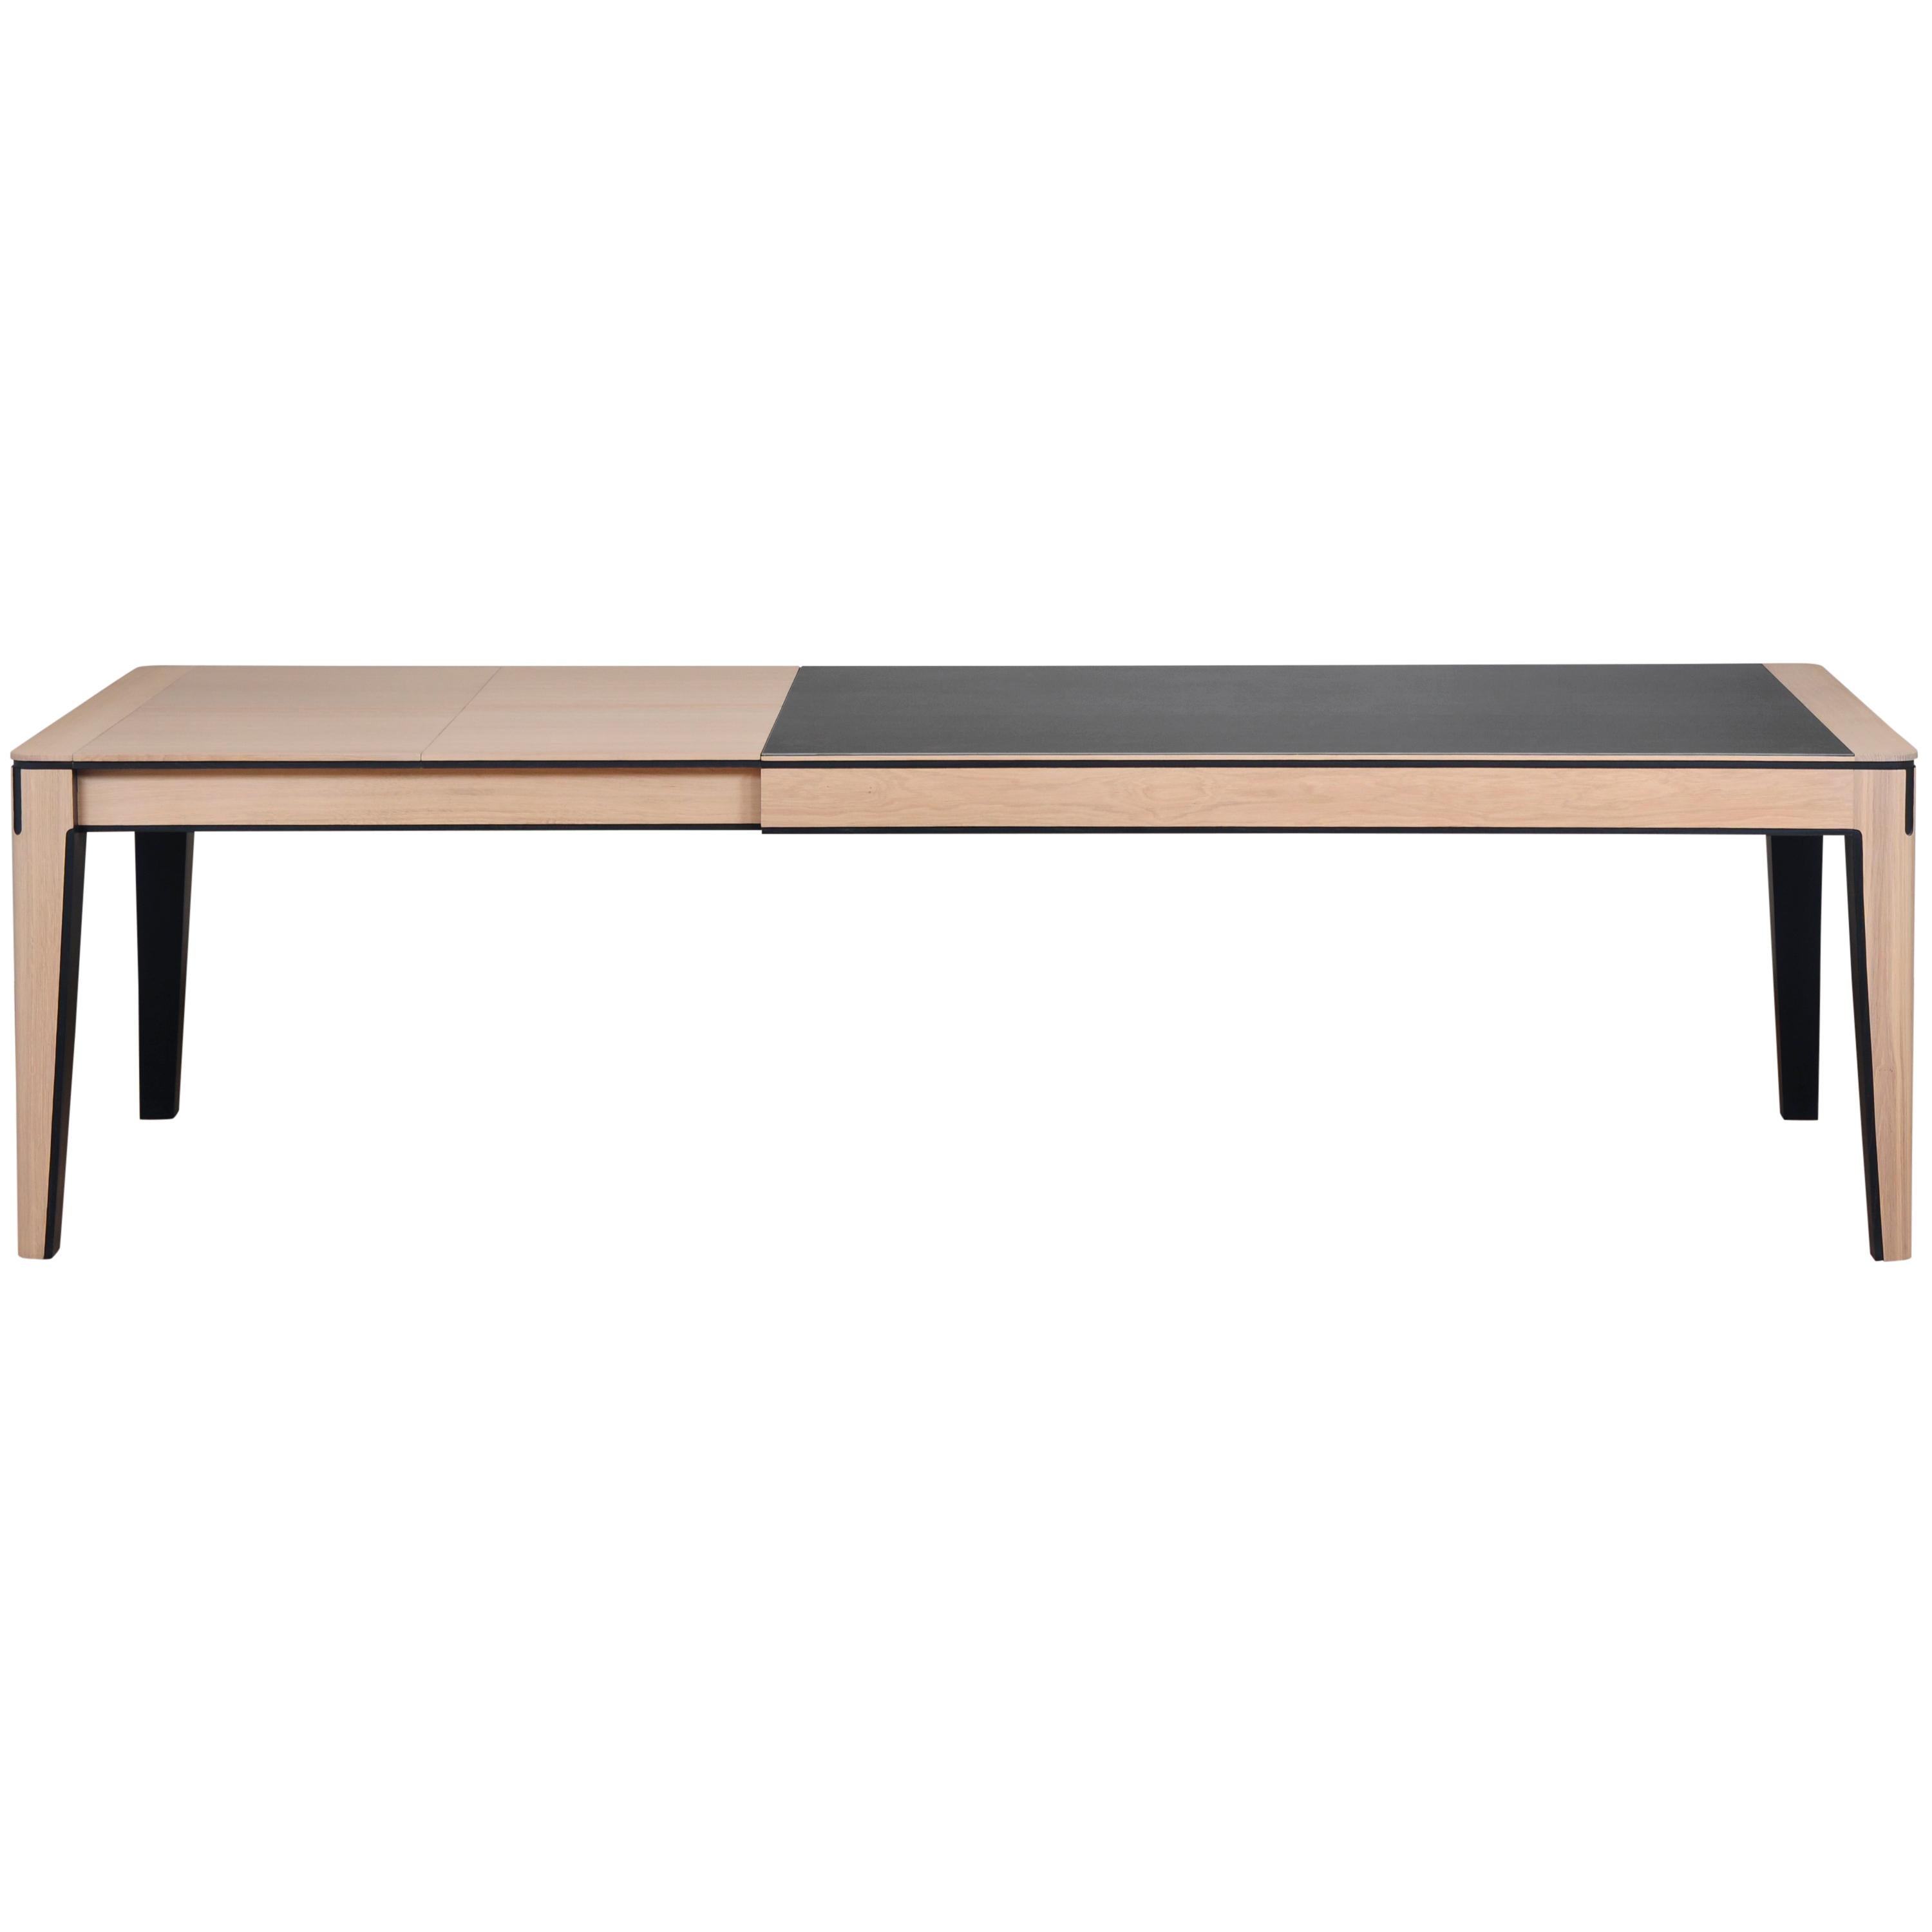 French Solid oak & ceramic top extensible table, design by Christophe Lecomte   For Sale